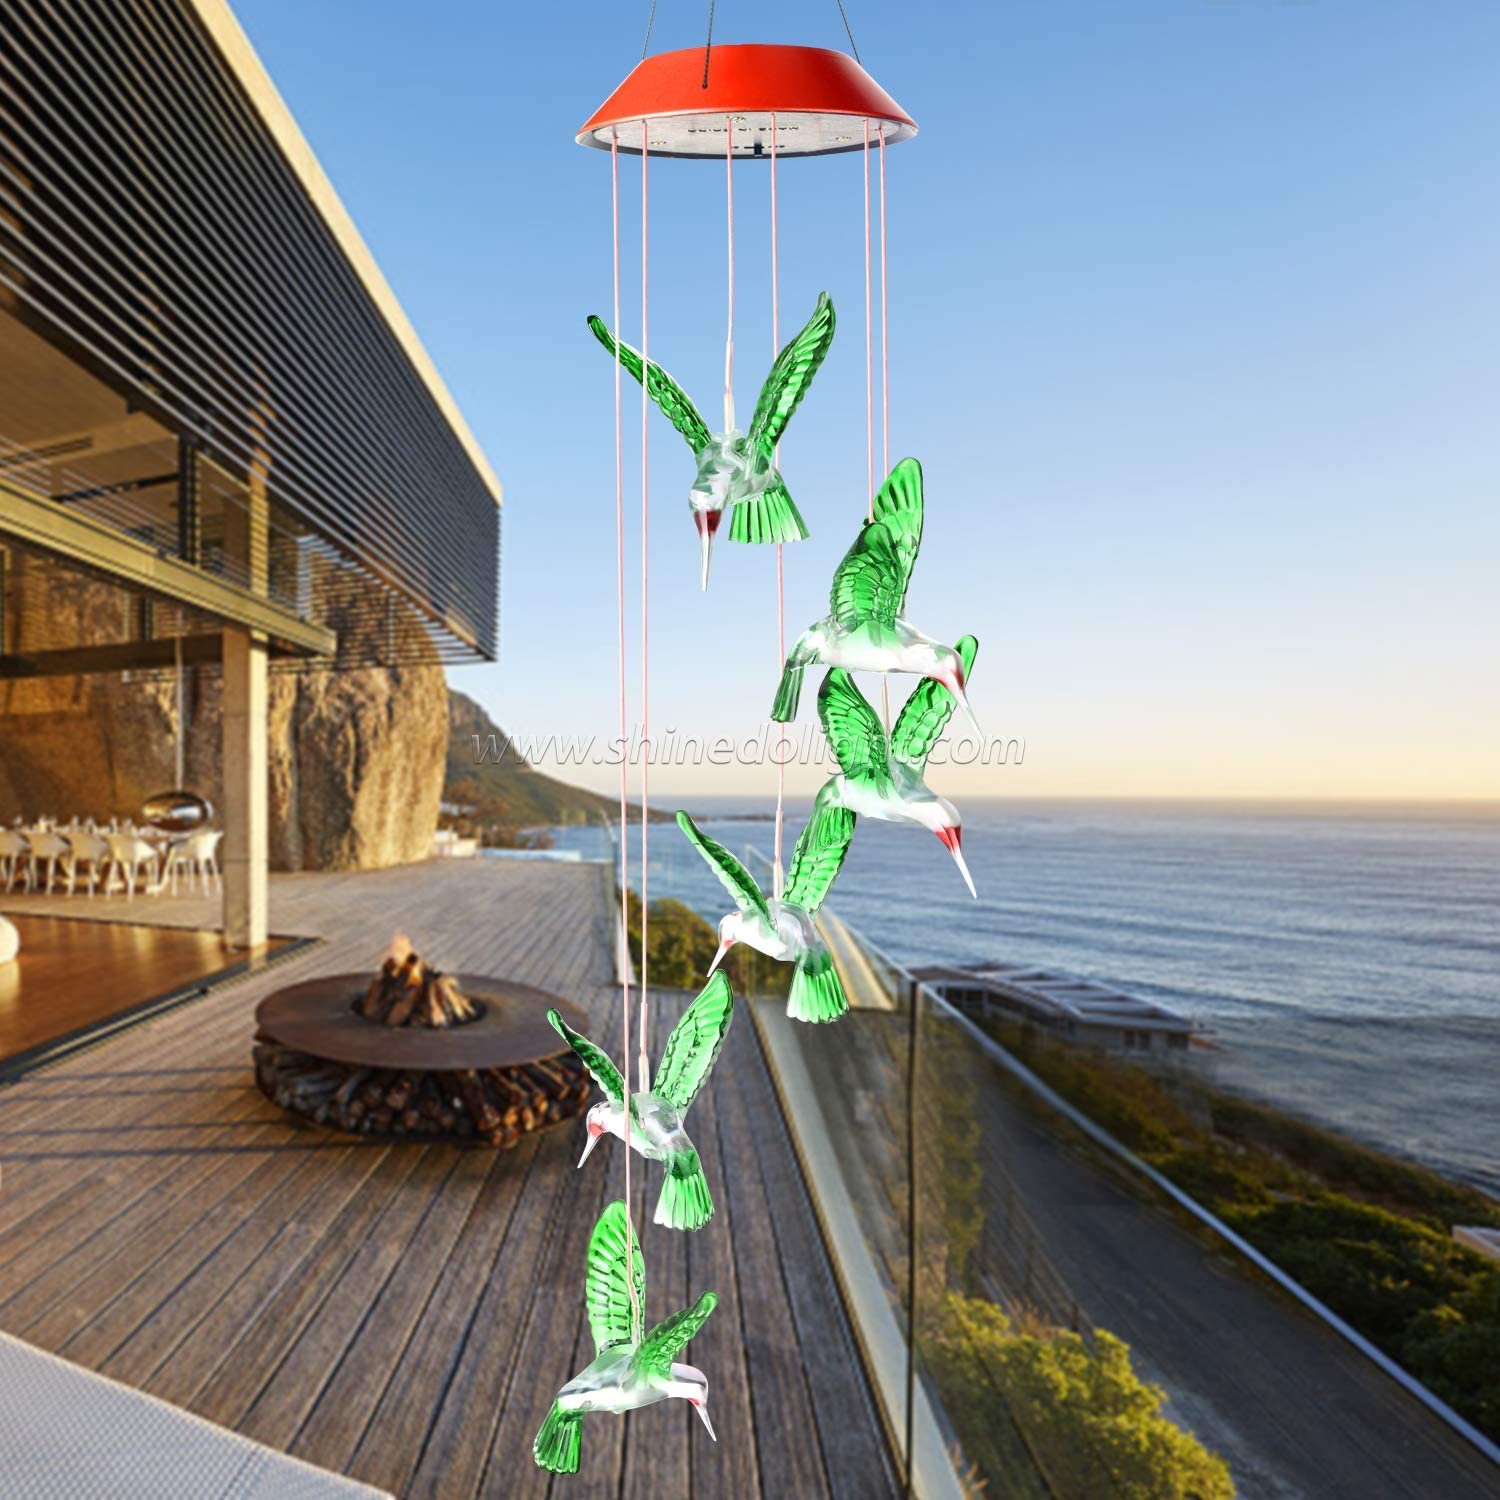 Hummingbird Solar Garden Wind Chime Outdoor Waterproof Color Changing LED Solar Wind Chime Decorative Solar Wind Chime For Gift